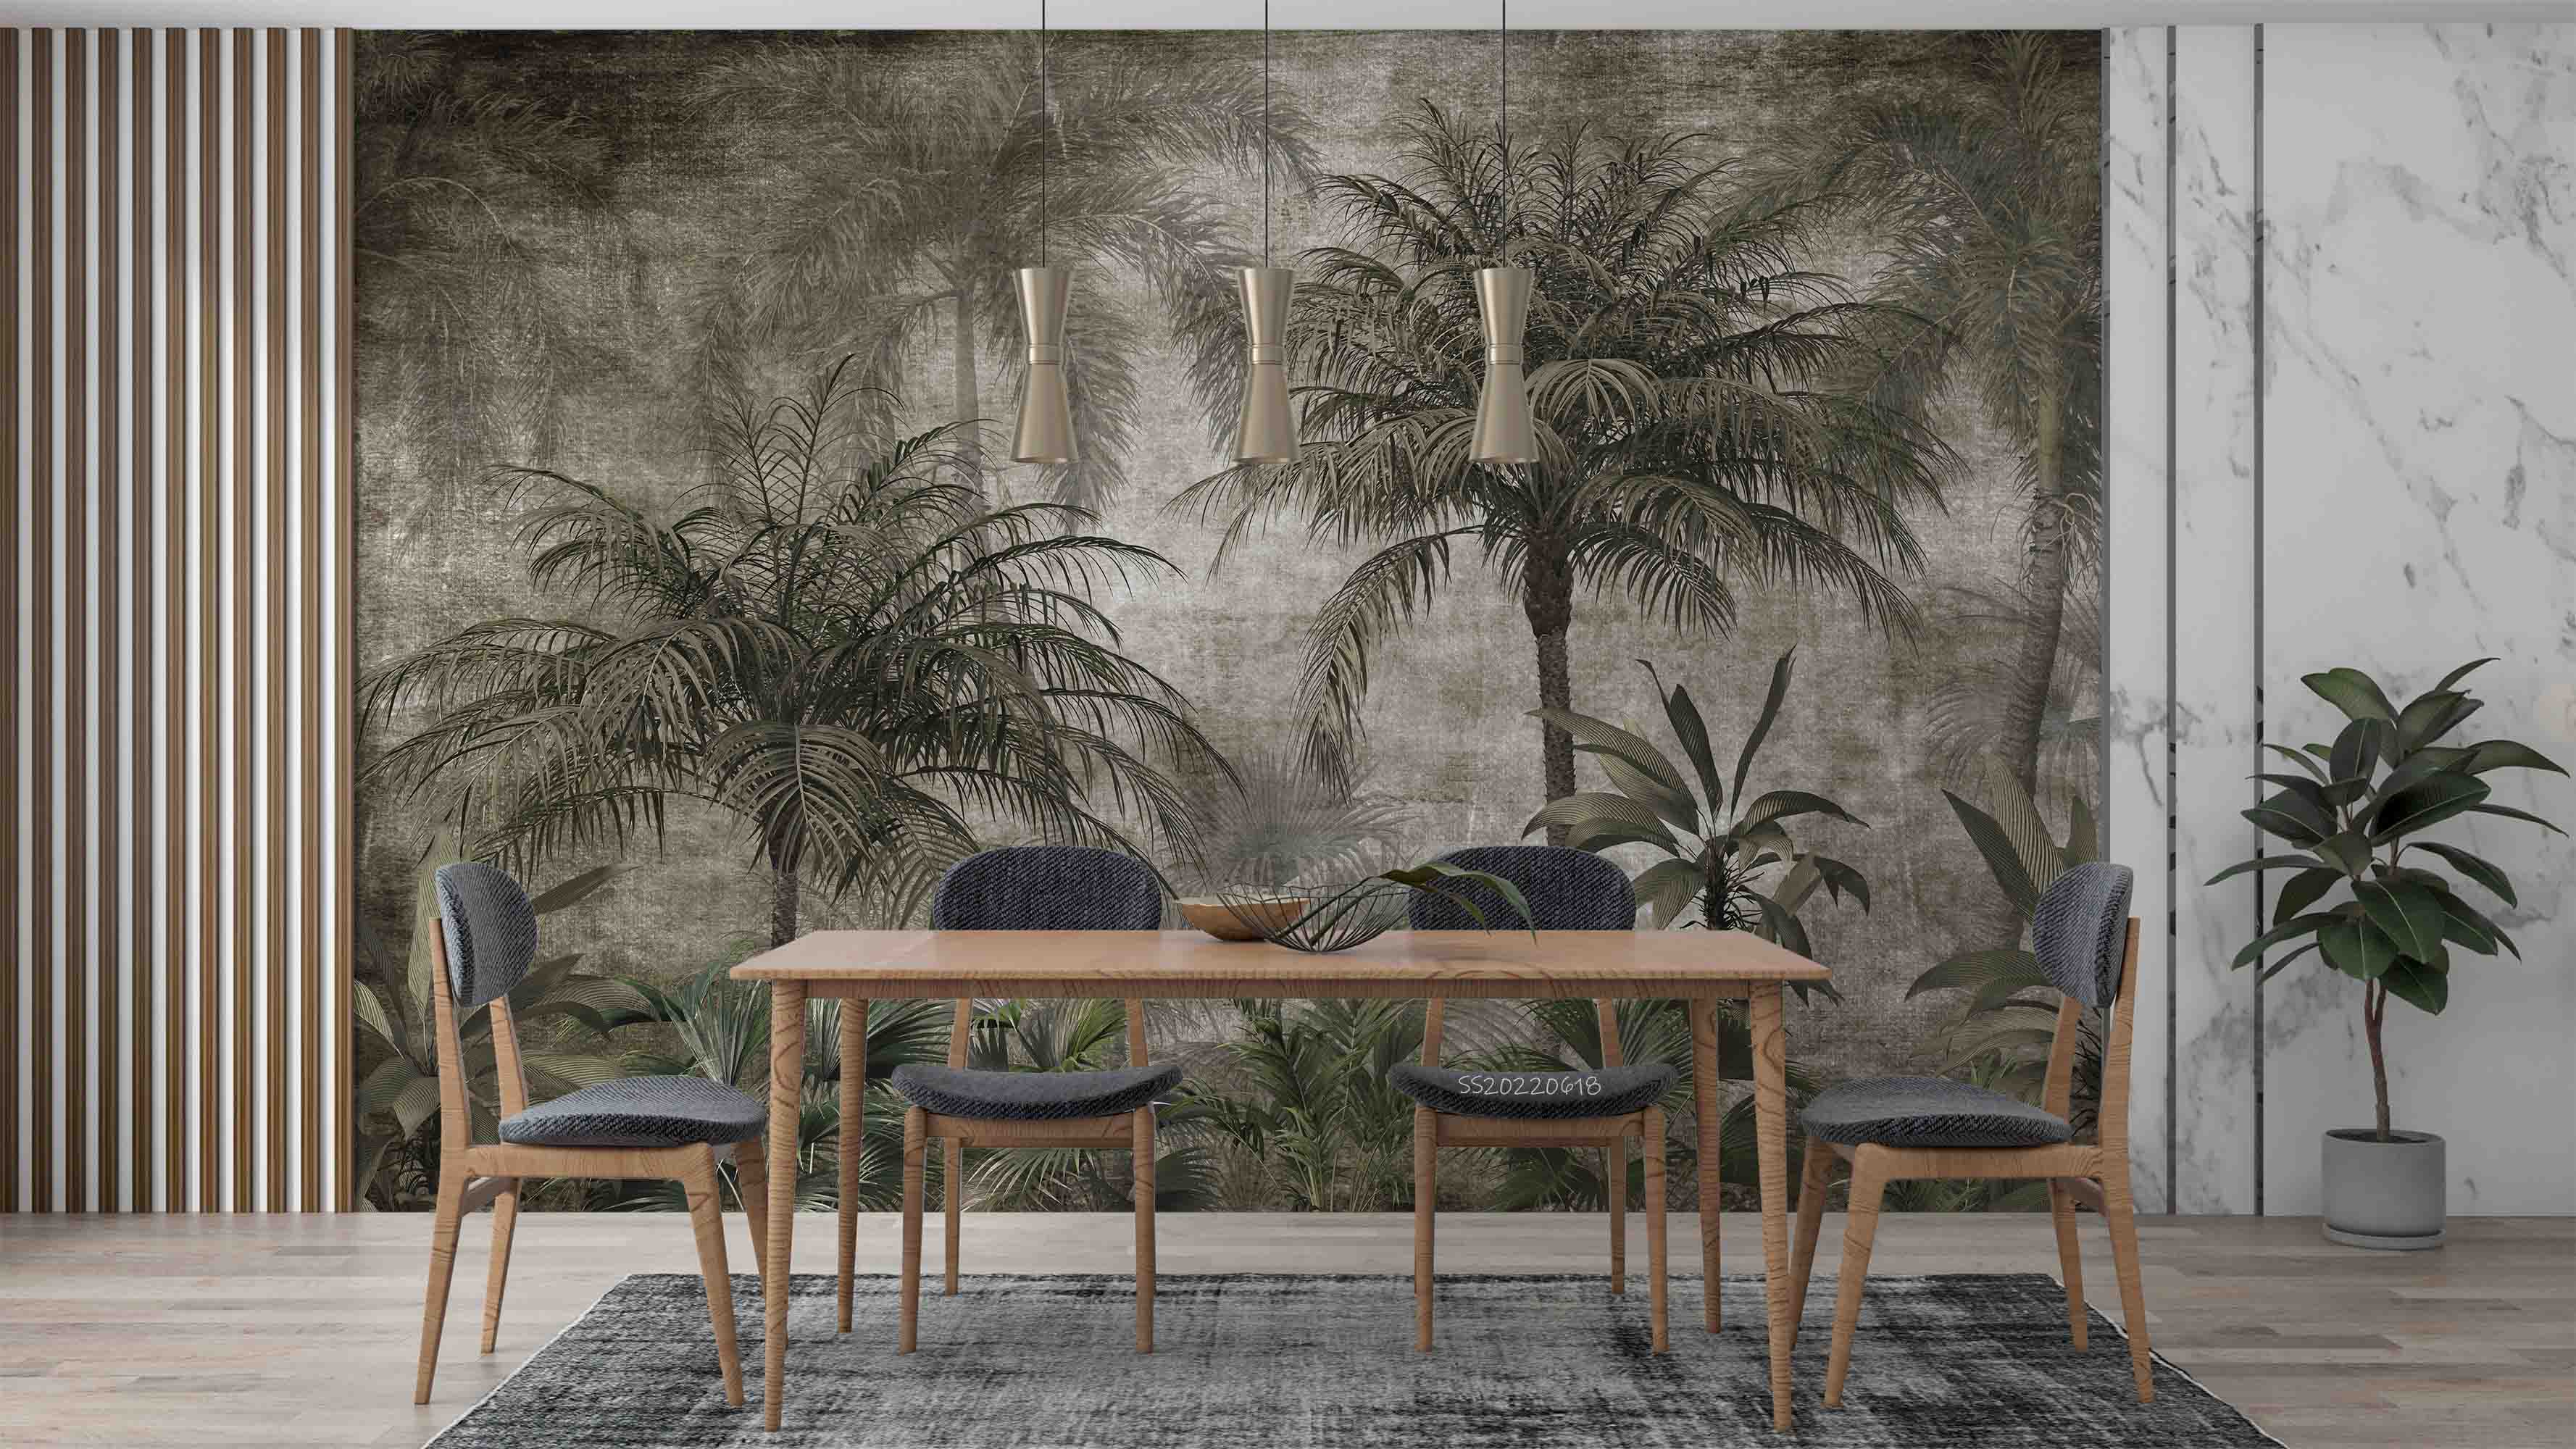 3D Vintage Tropical Palm Tree Leaves Scenery Wall Mural Wallpaper GD 773- Jess Art Decoration